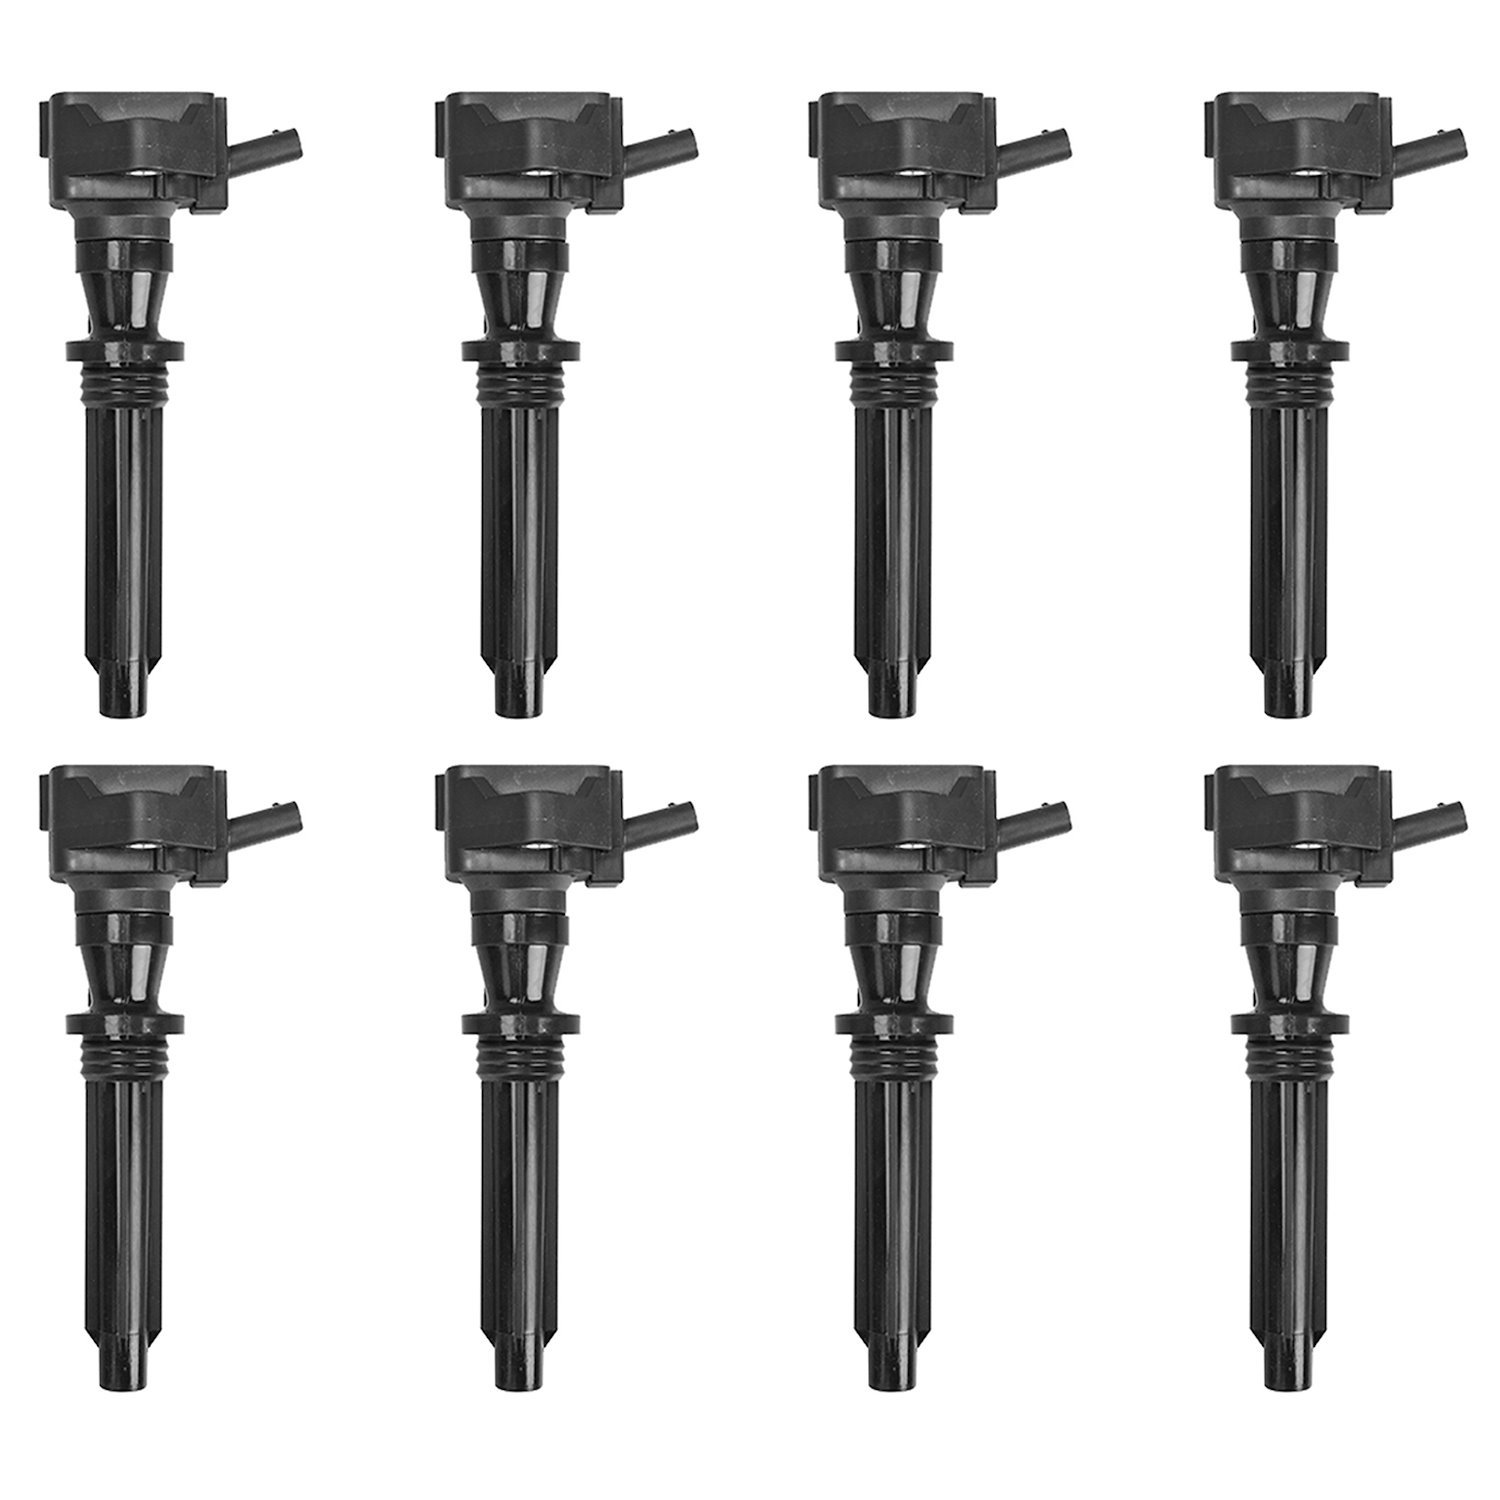 OE Replacement Ignition Coils for Land Rover 202014-202020 LR4 Range Rove